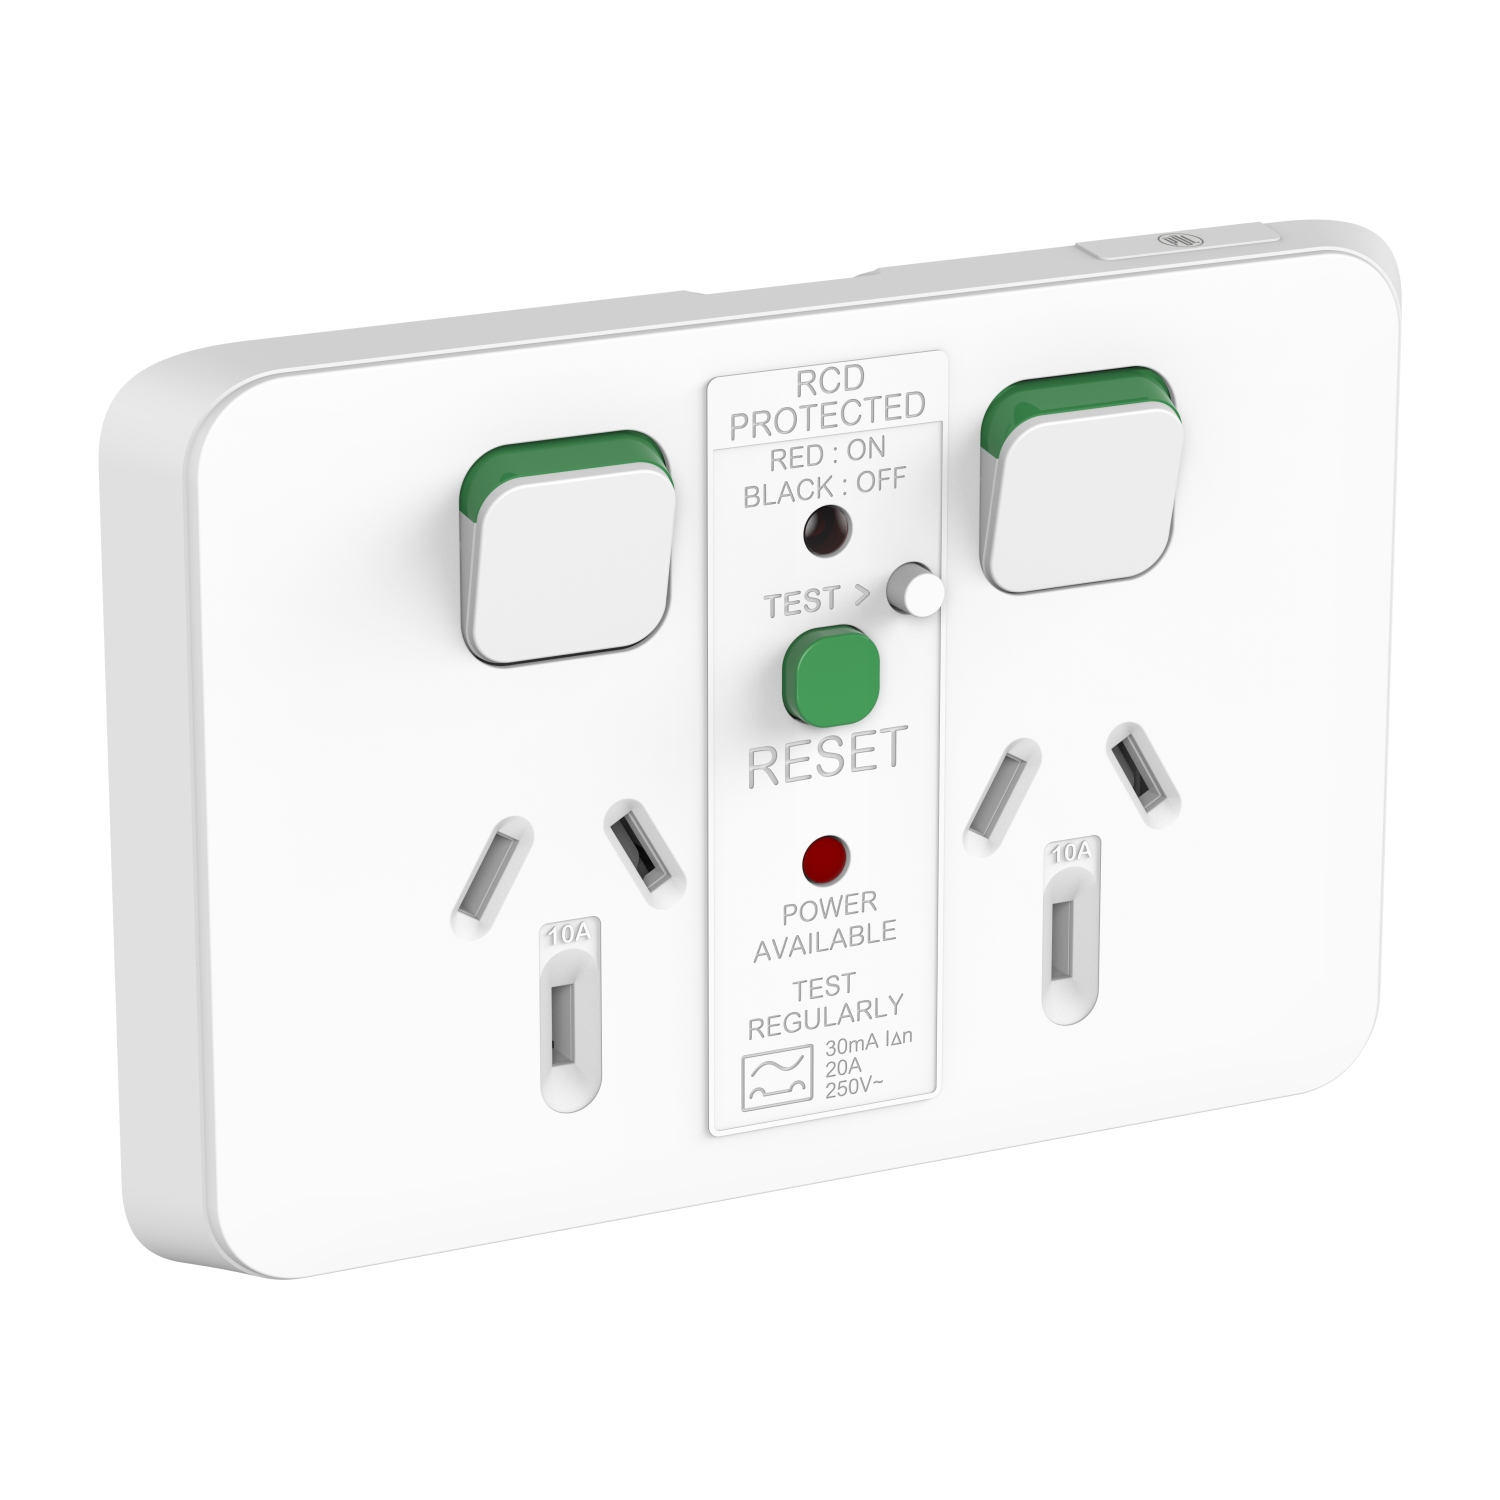 PDL Iconic - Cover Plate Double Switched Socket RCD 30mA Horizontal 10A - Vivid White